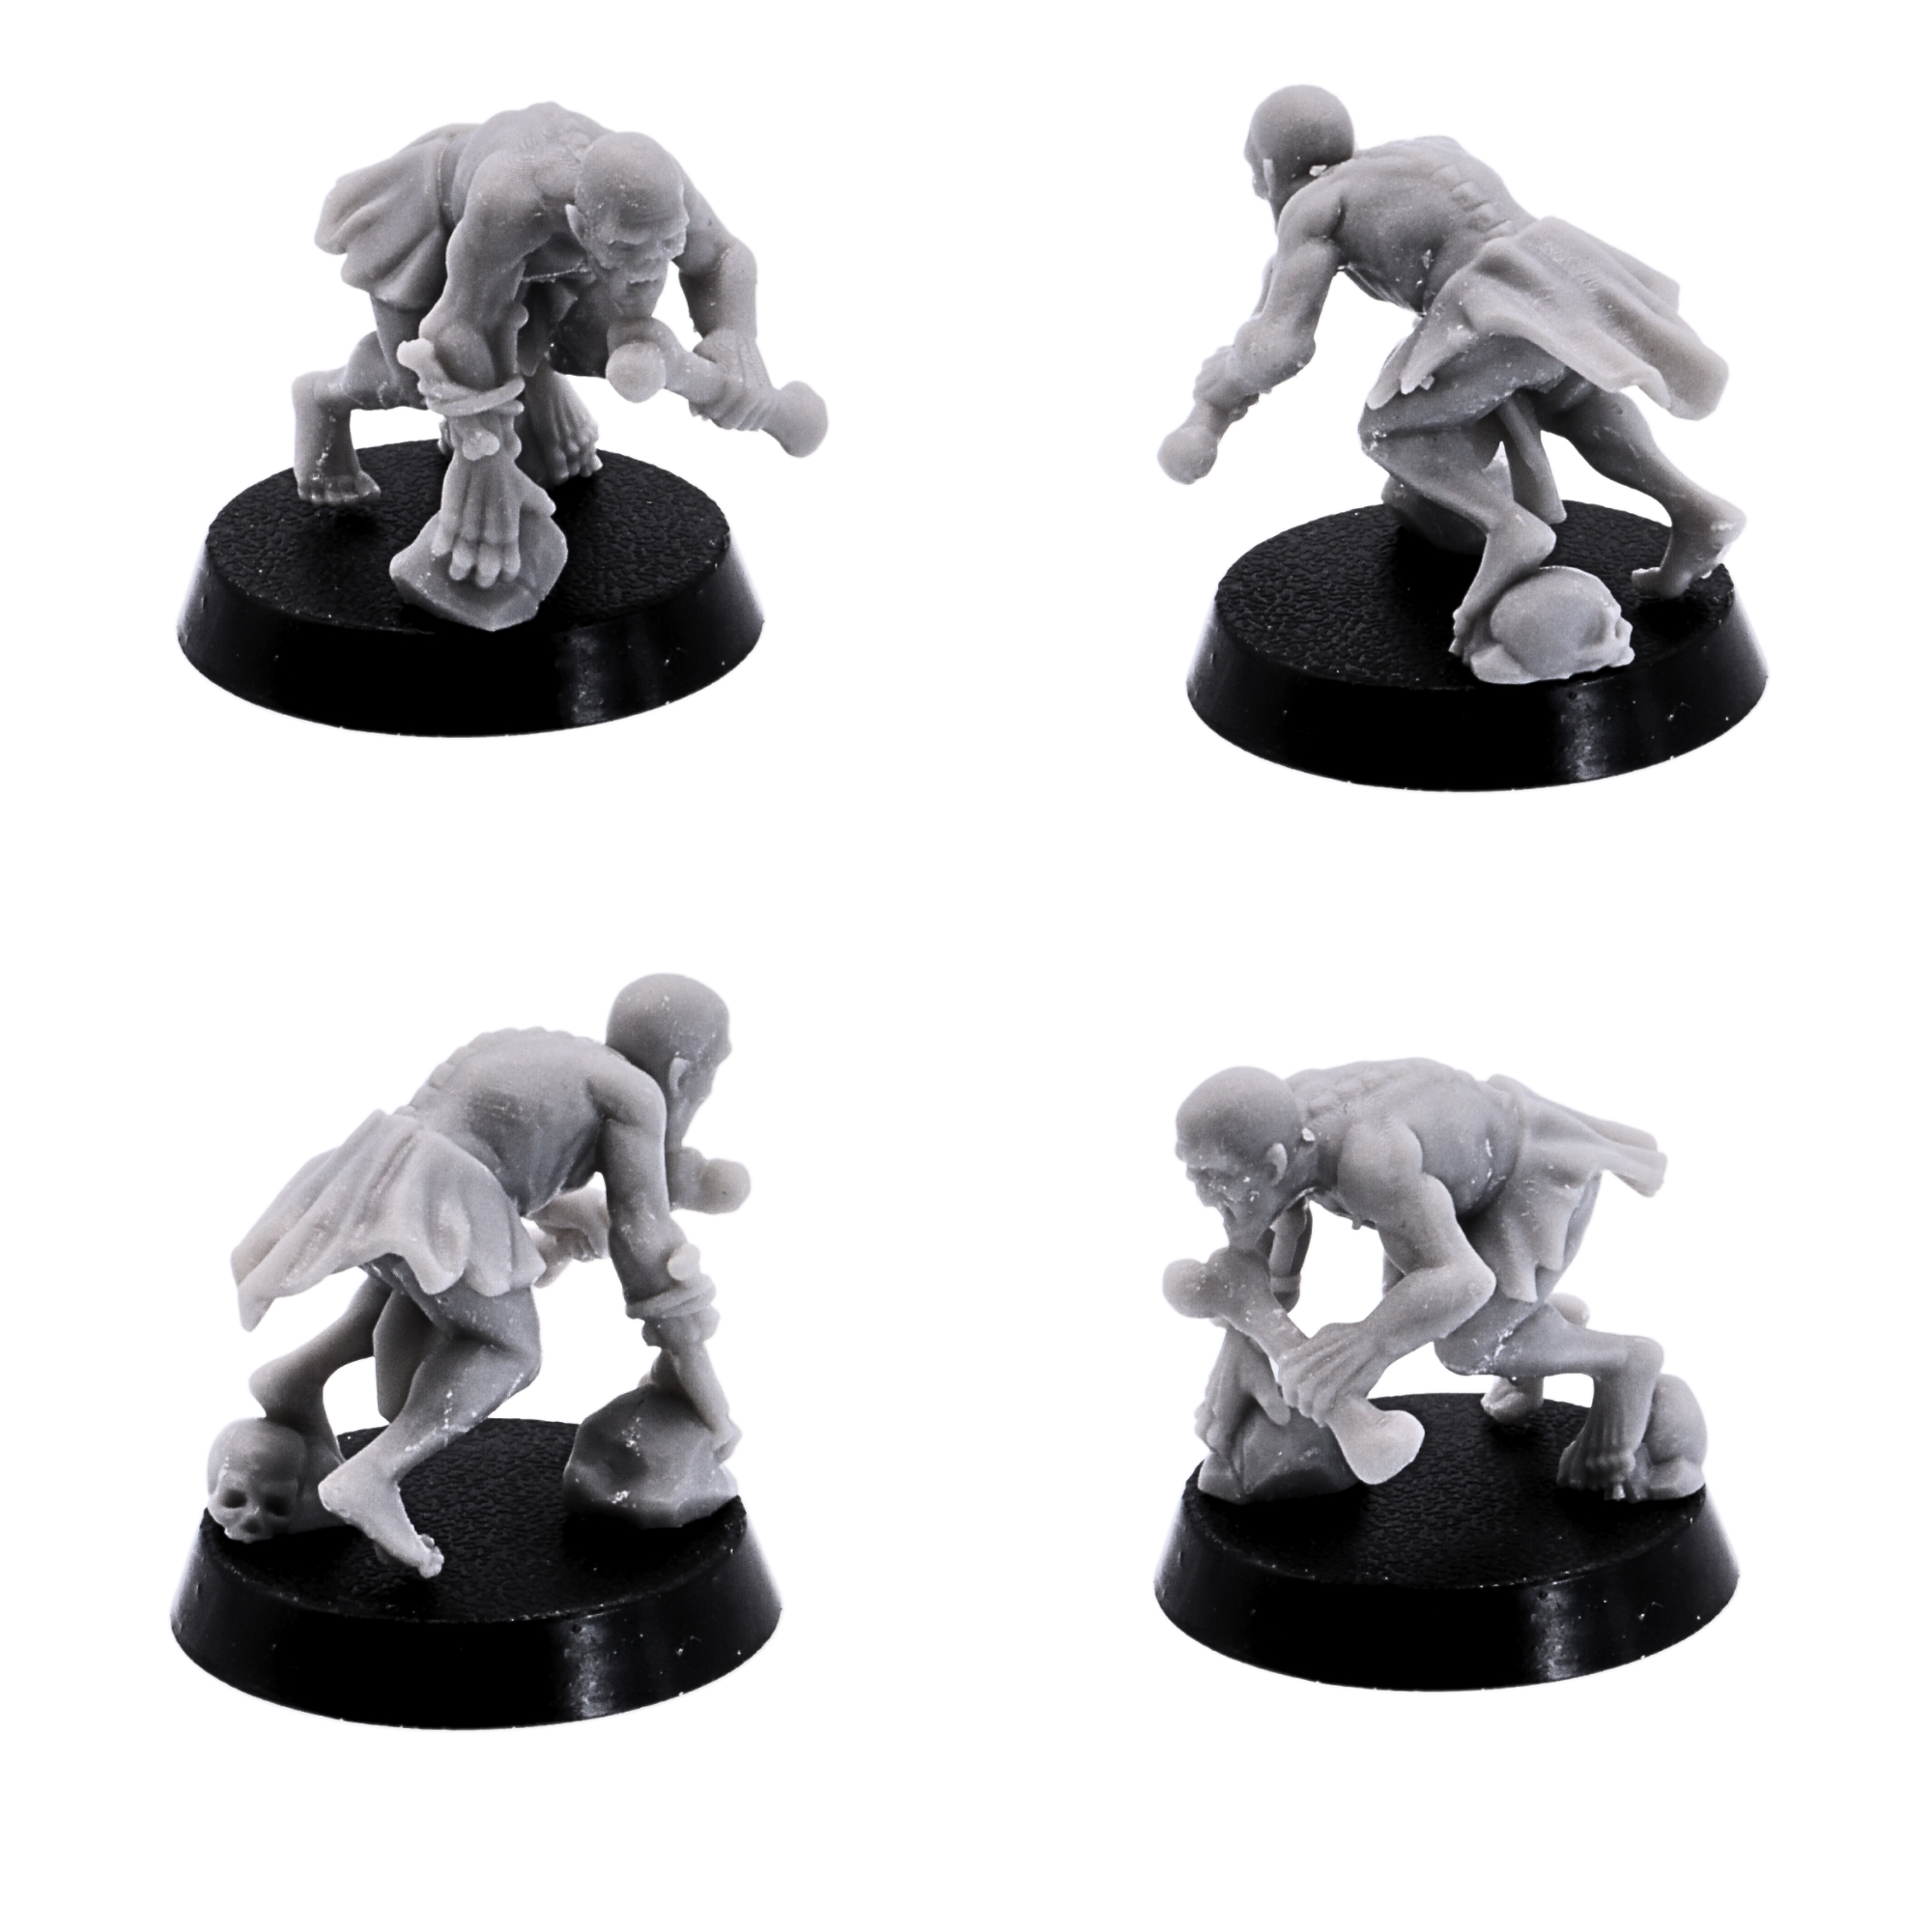 Wargaming Undead Miniatures designed by Highlands Miniatures